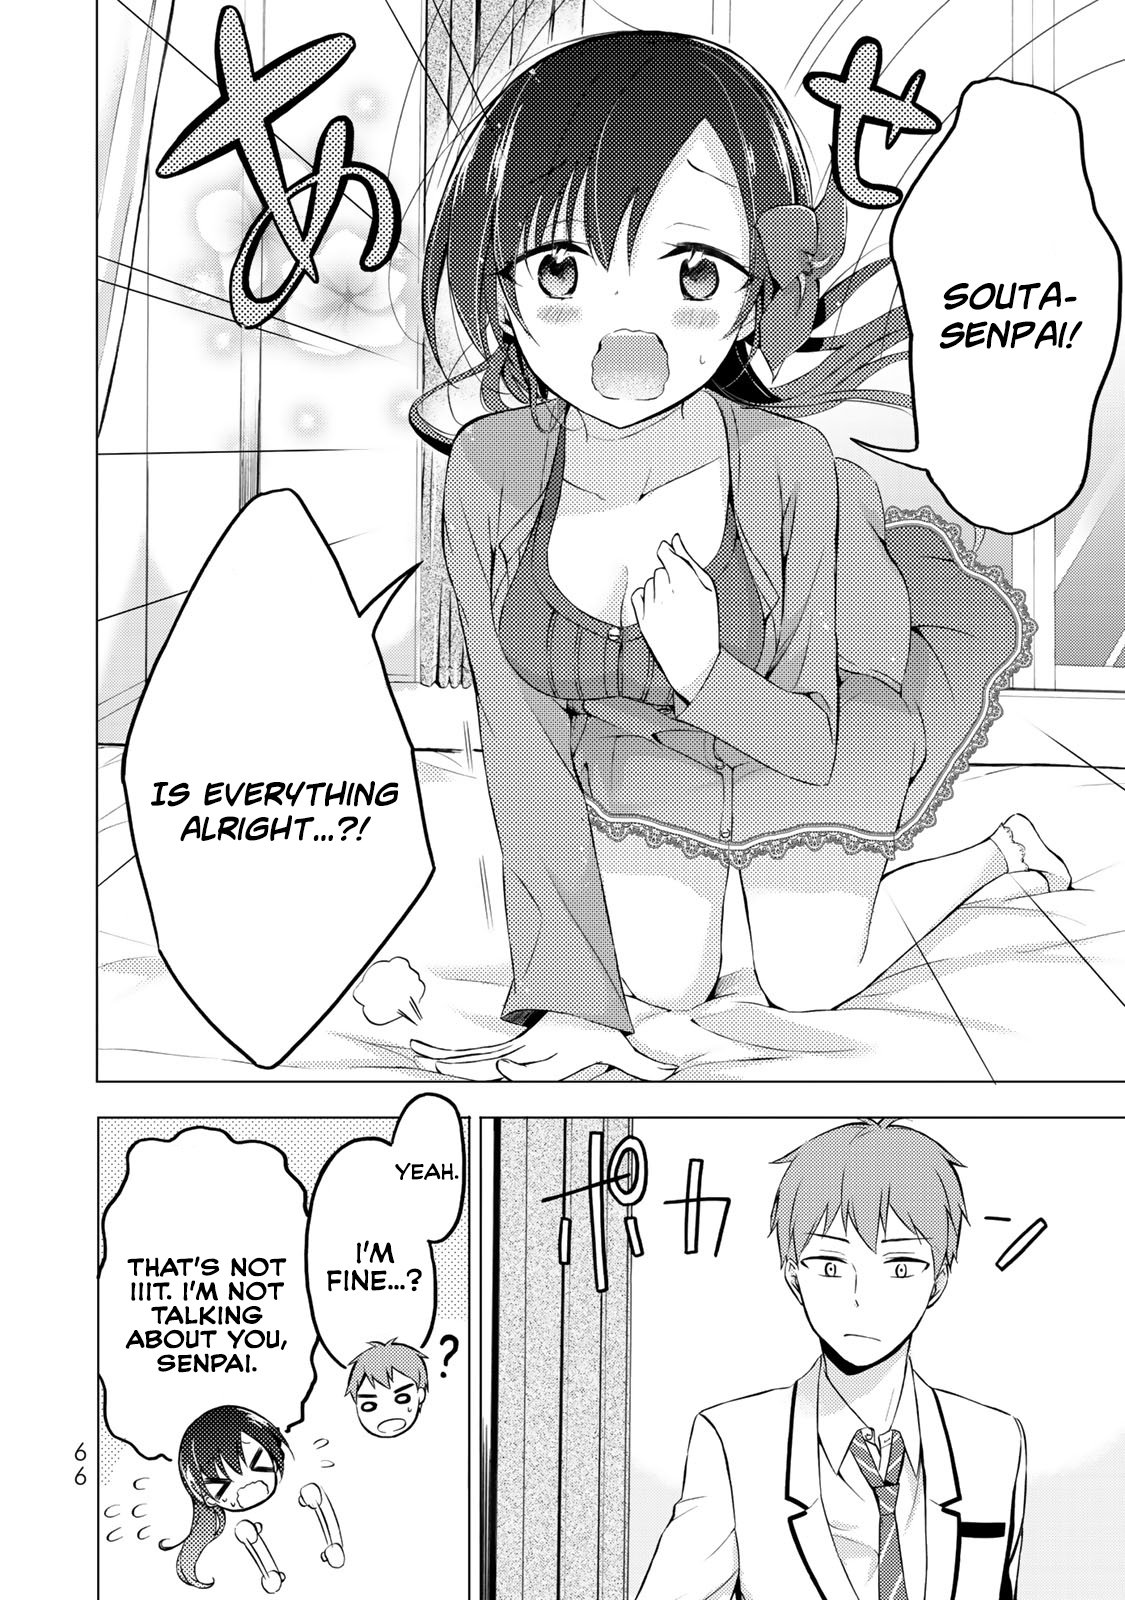 The Student Council President Solves Everything on the Bed vol.1 ch.2.1